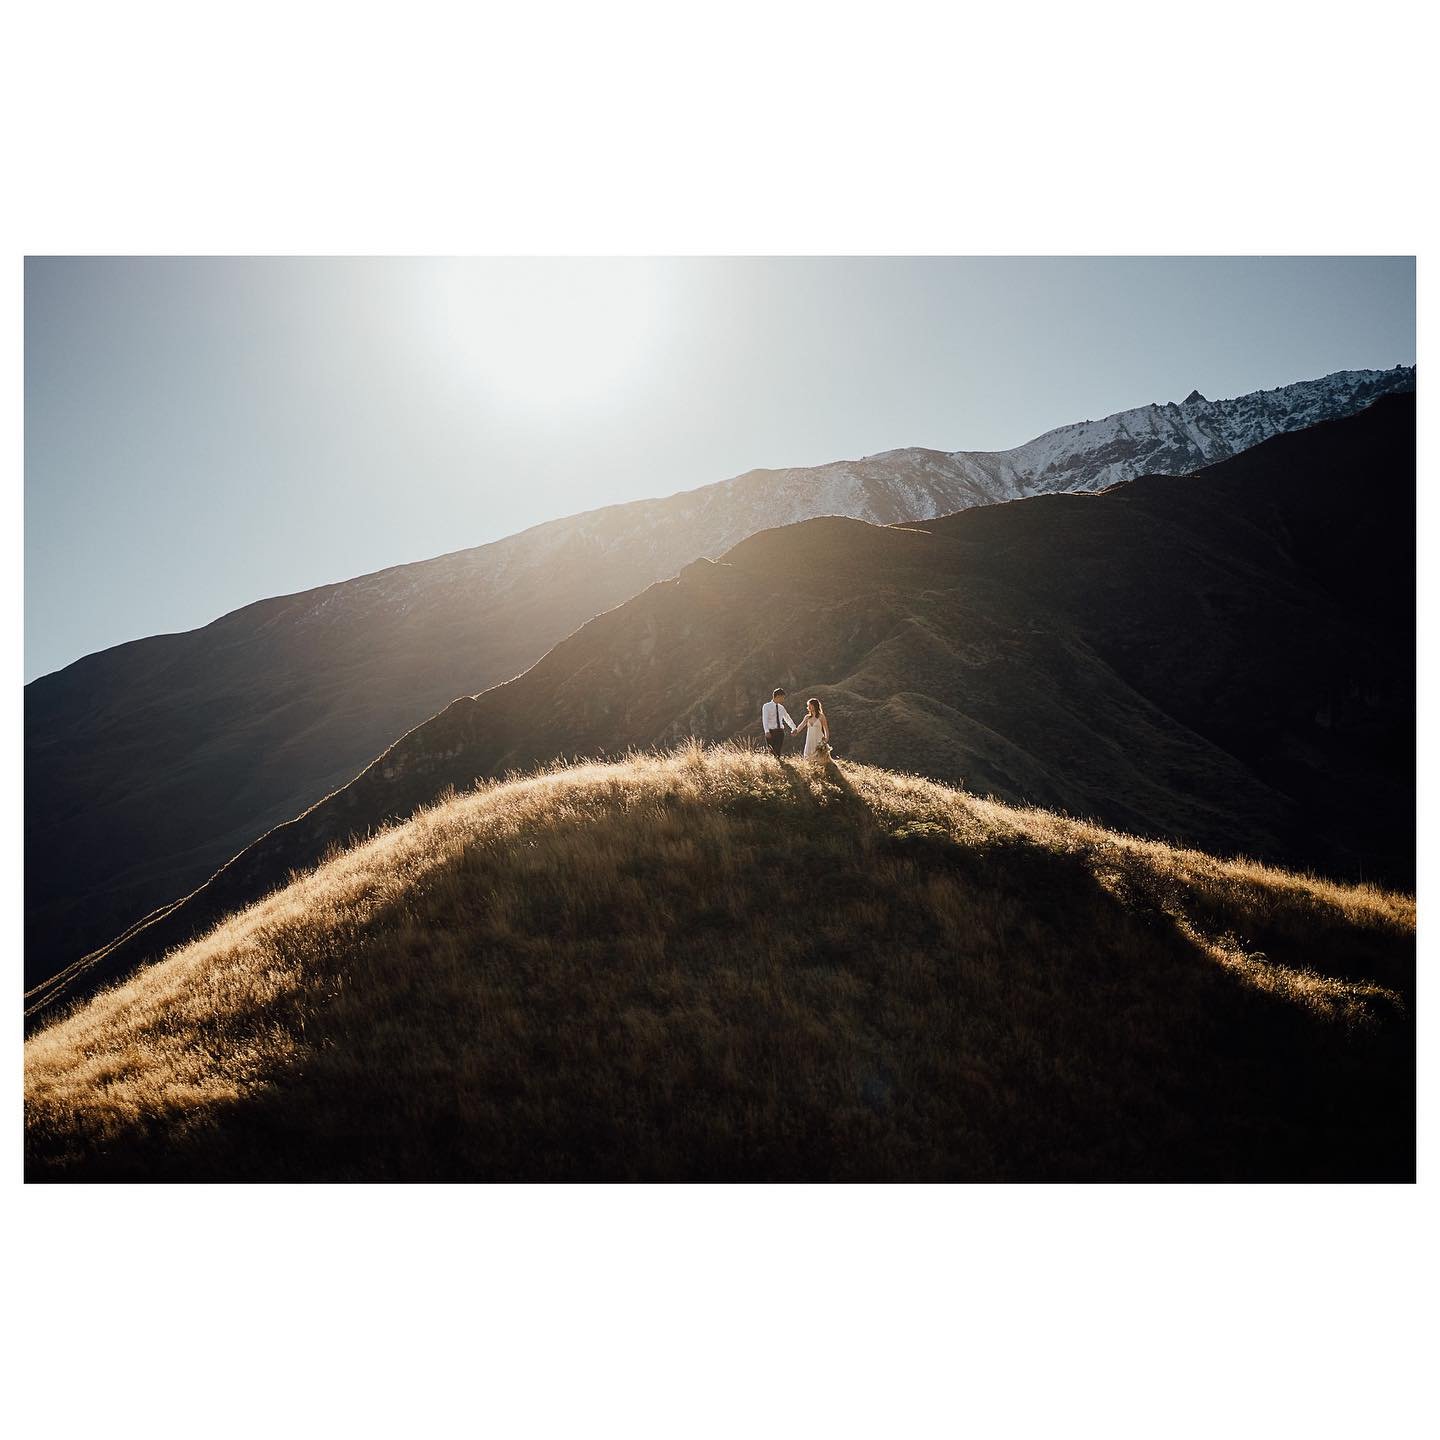 Part I of an incredible afternoon with Carina &amp; Jer for their pre wedding. In partnership with @ridgelinenz I&rsquo;ve become not only the photographer, but also the guide and 4WD driver, so we can truly experience exclusive locations on nature&r